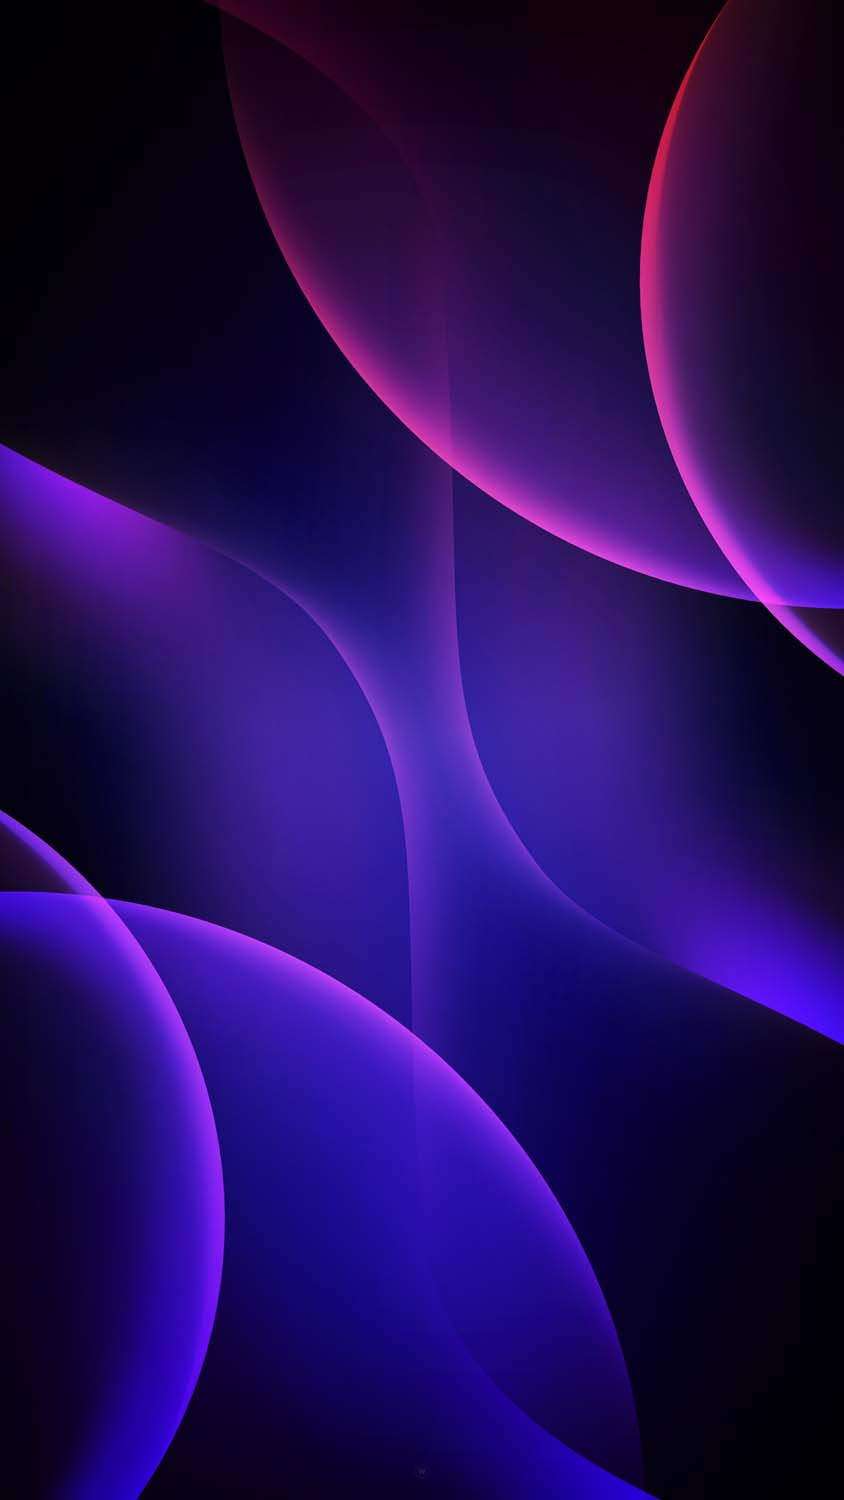 Blue Waves Abstract IPhone Wallpaper HD  IPhone Wallpapers